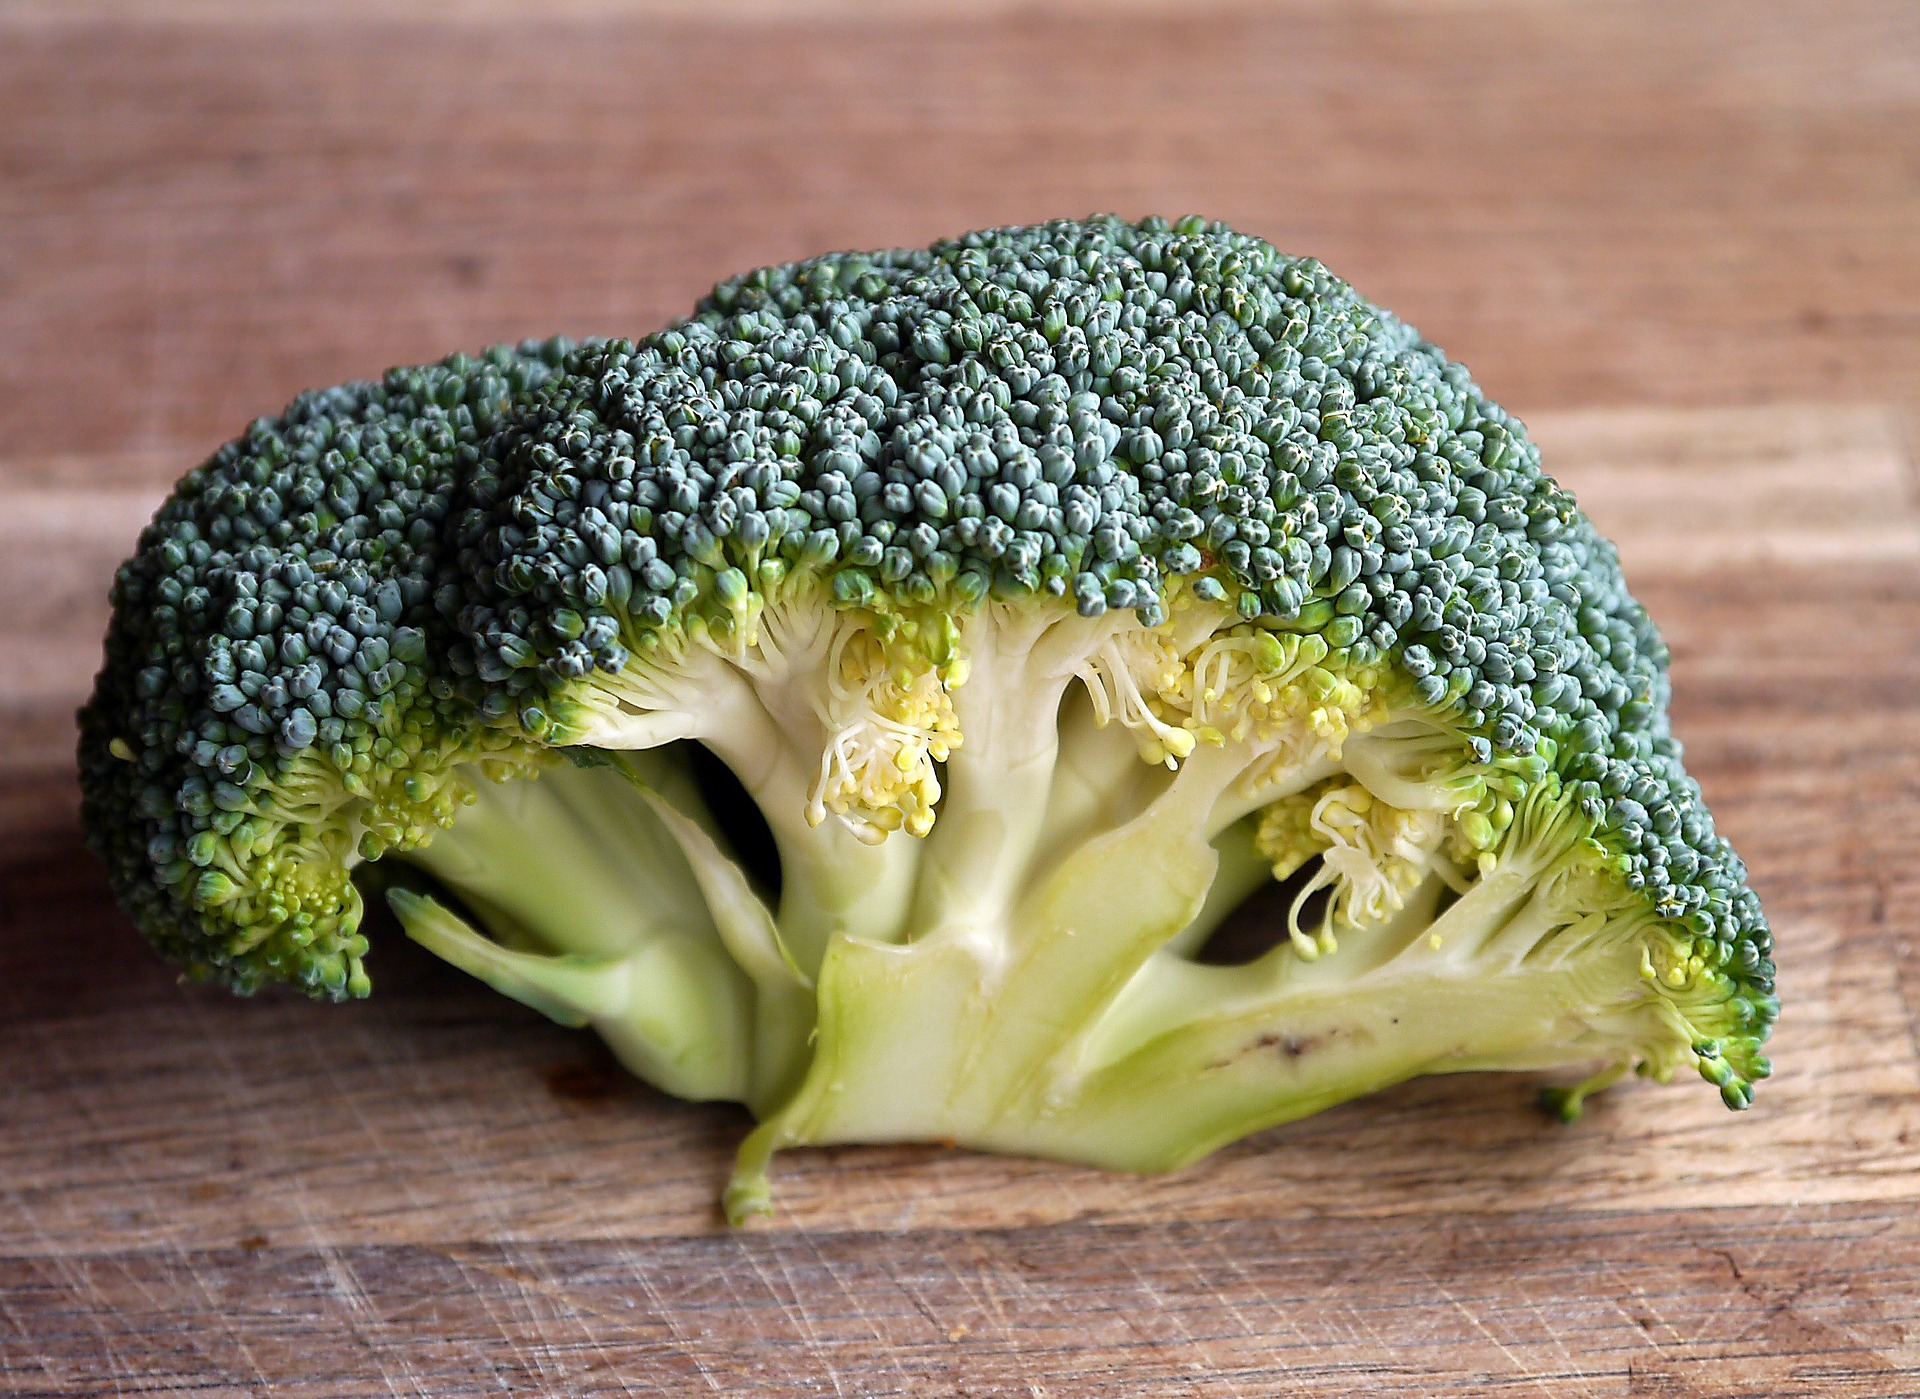 7 Benefits of Broccoli and 3 Side Effects Of Broccoli